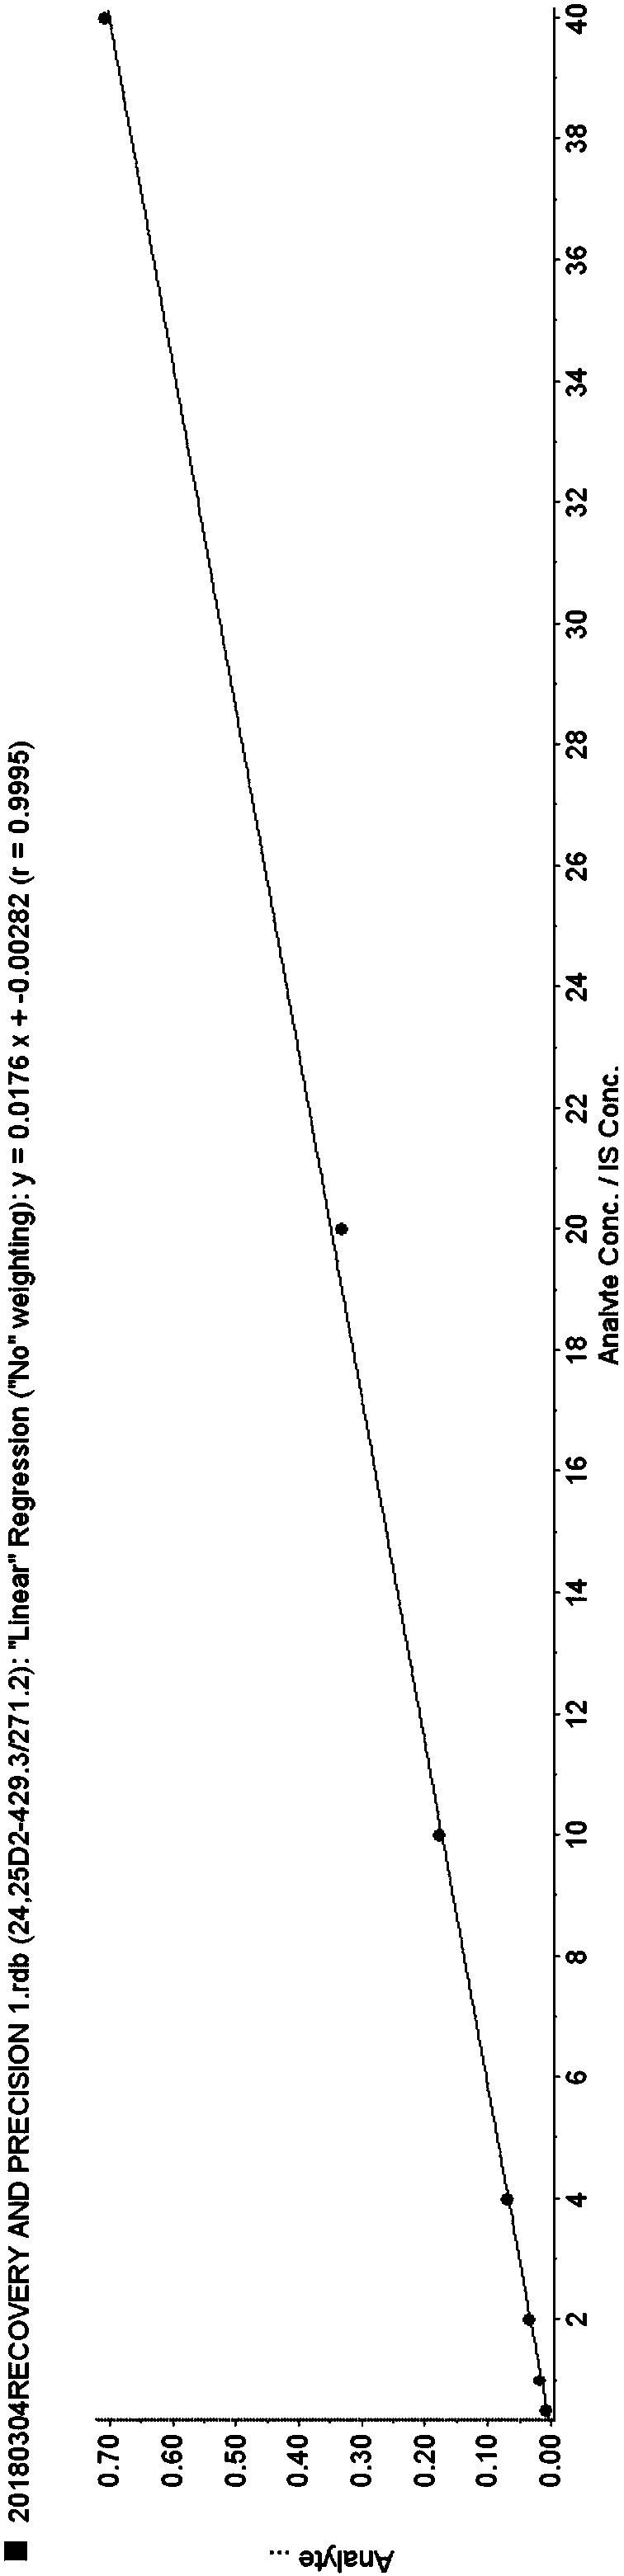 Method for simultaneously detecting serum 24,25(OH)2D and 25OHD